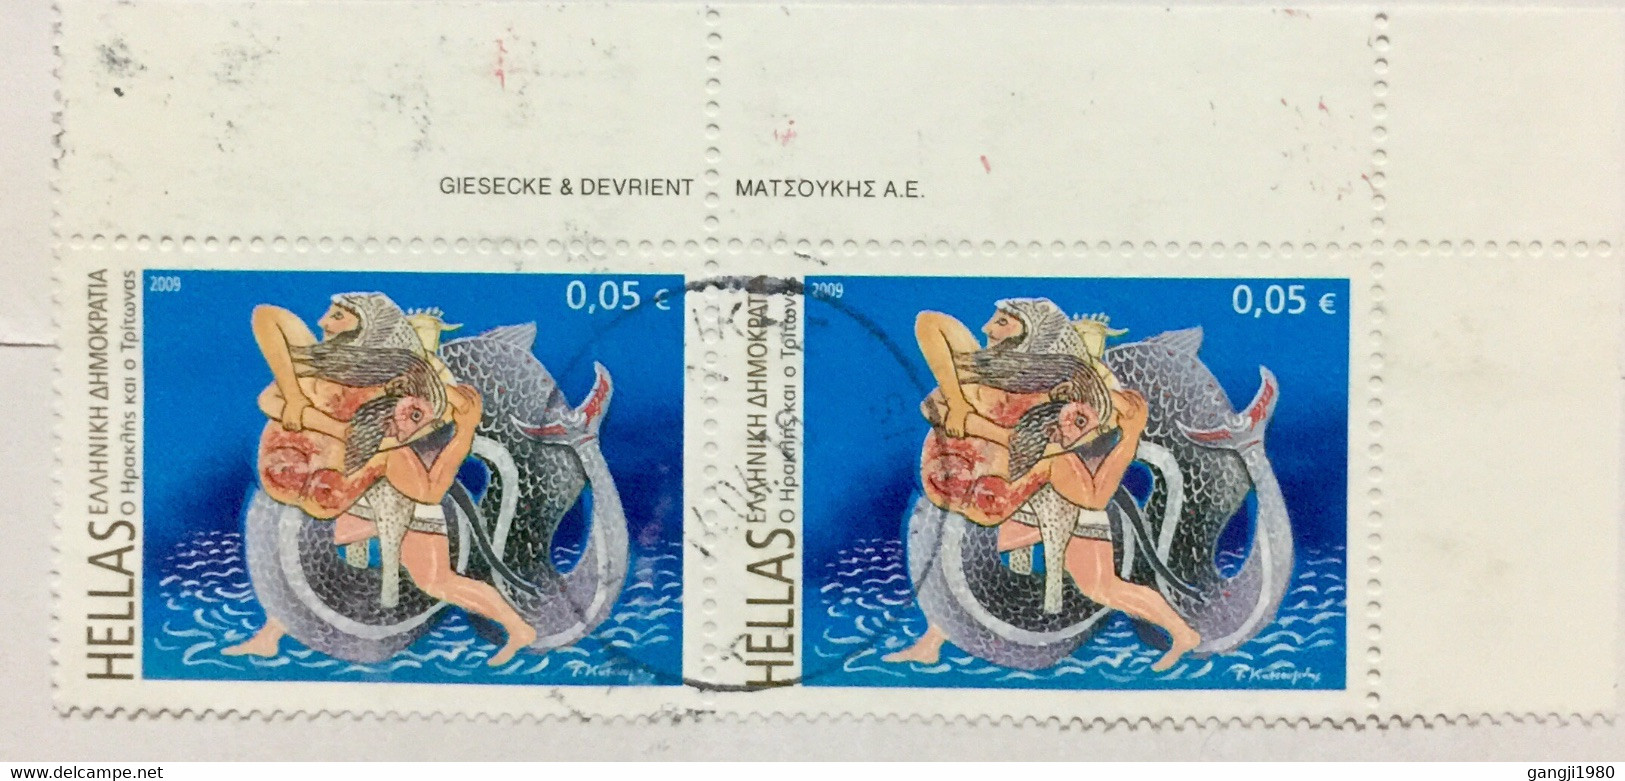 GREECE 2009, USED 4 STAMPS REGISTERED COVER TO U.K ,SHIP BALLON ,EUROPA,ART ,FISH,MAN ,WOMEN,PAINTING ART ,SEA ,WATER ,T - Covers & Documents